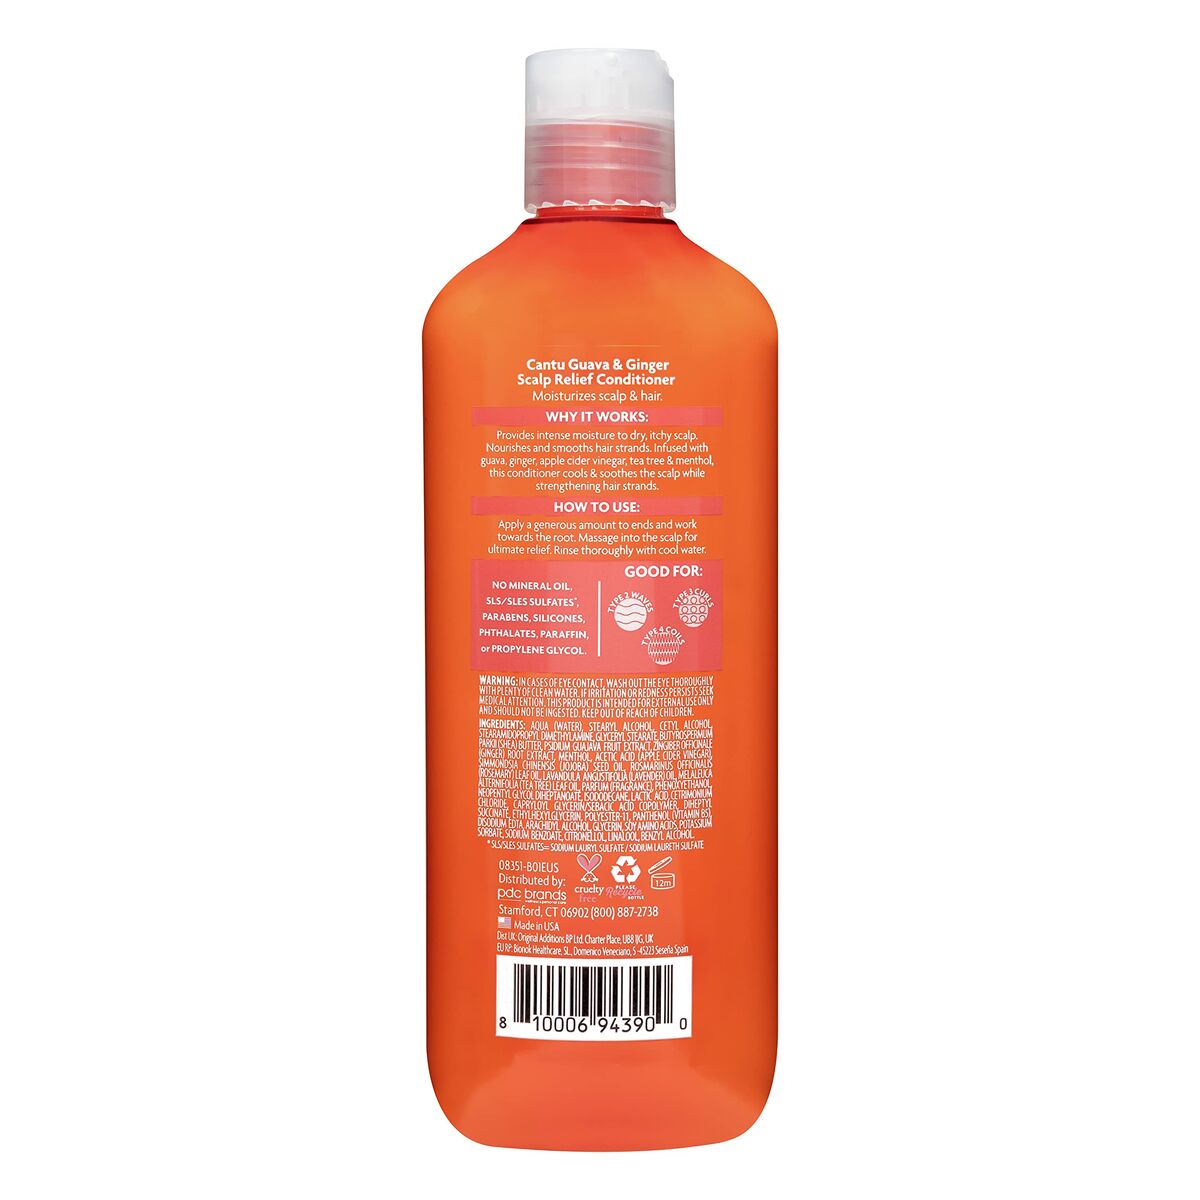 Conditioner Cantu Guava and Ginger 400 ml Soothing